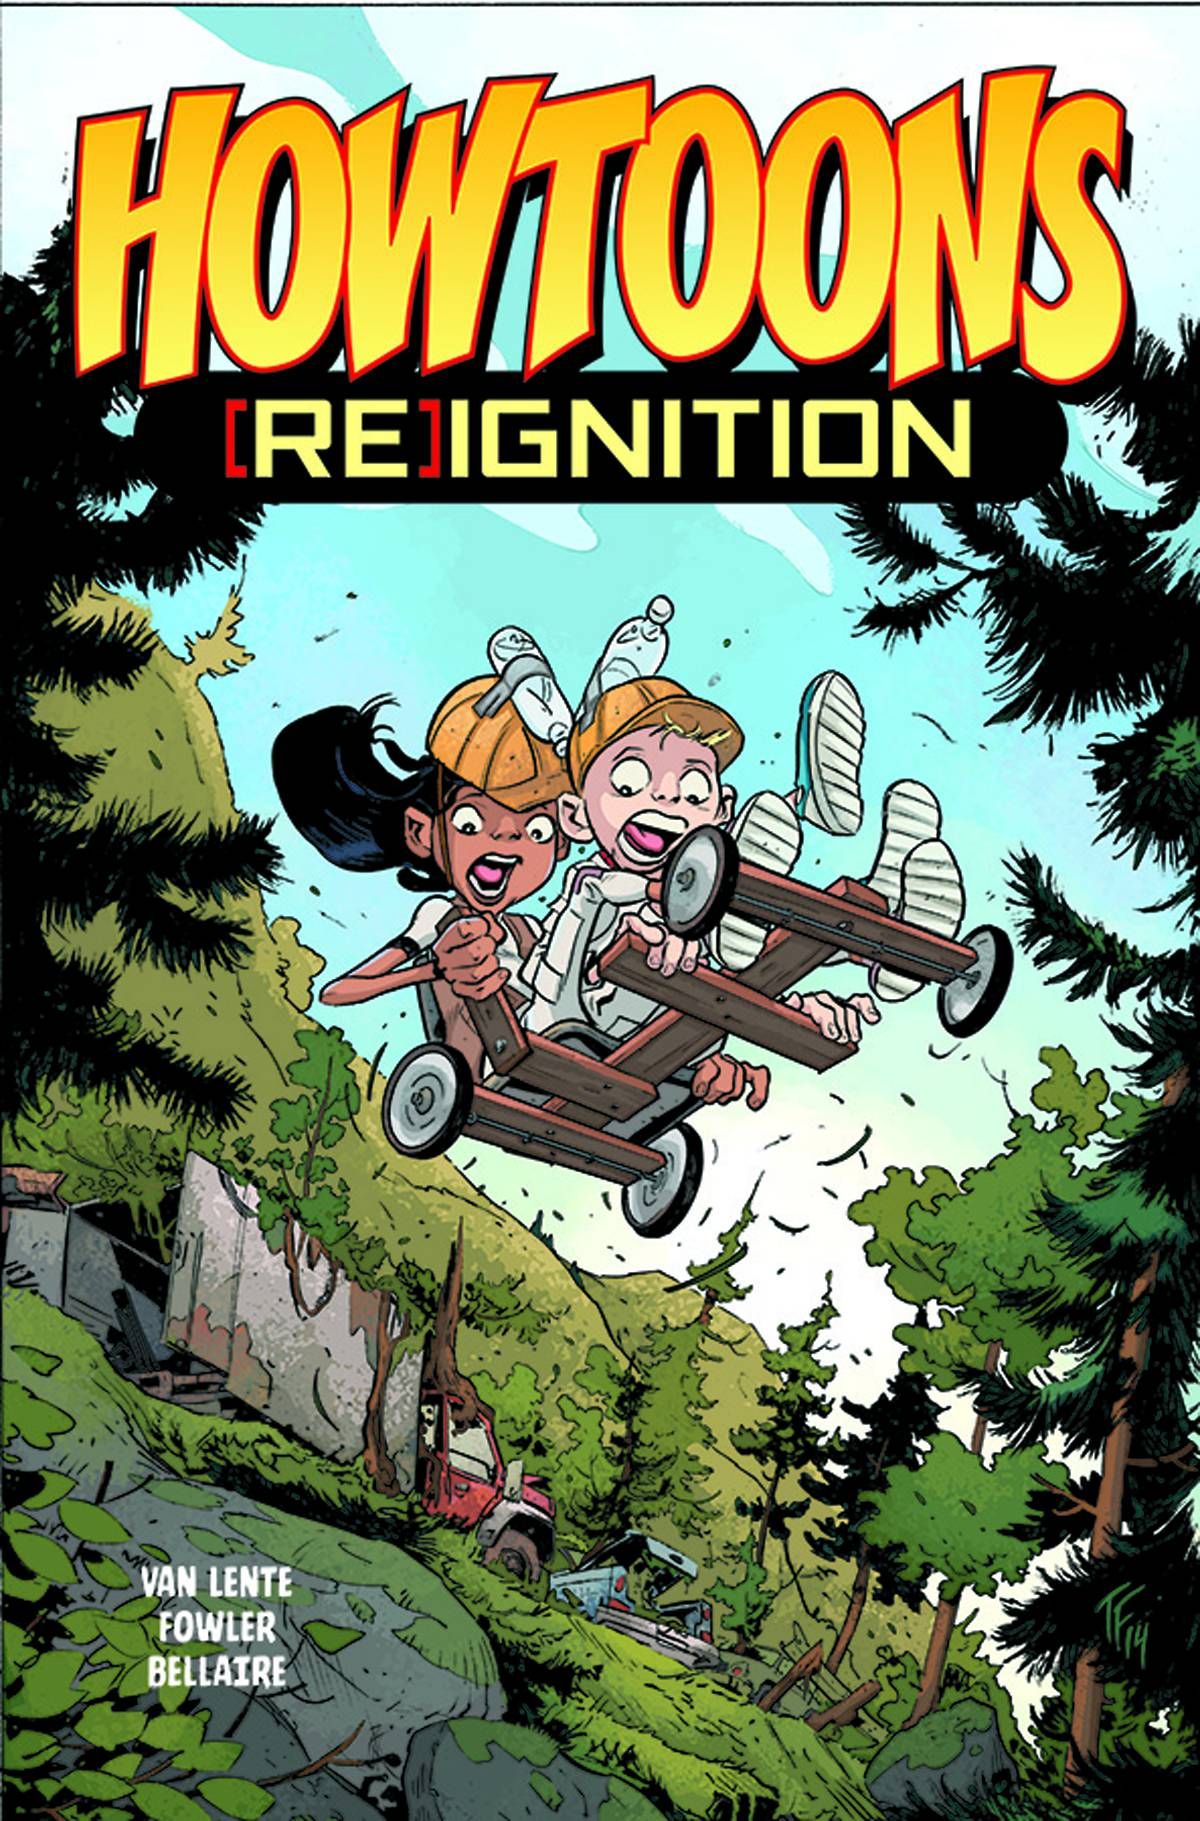 Howtoons Reignition #2 Comic